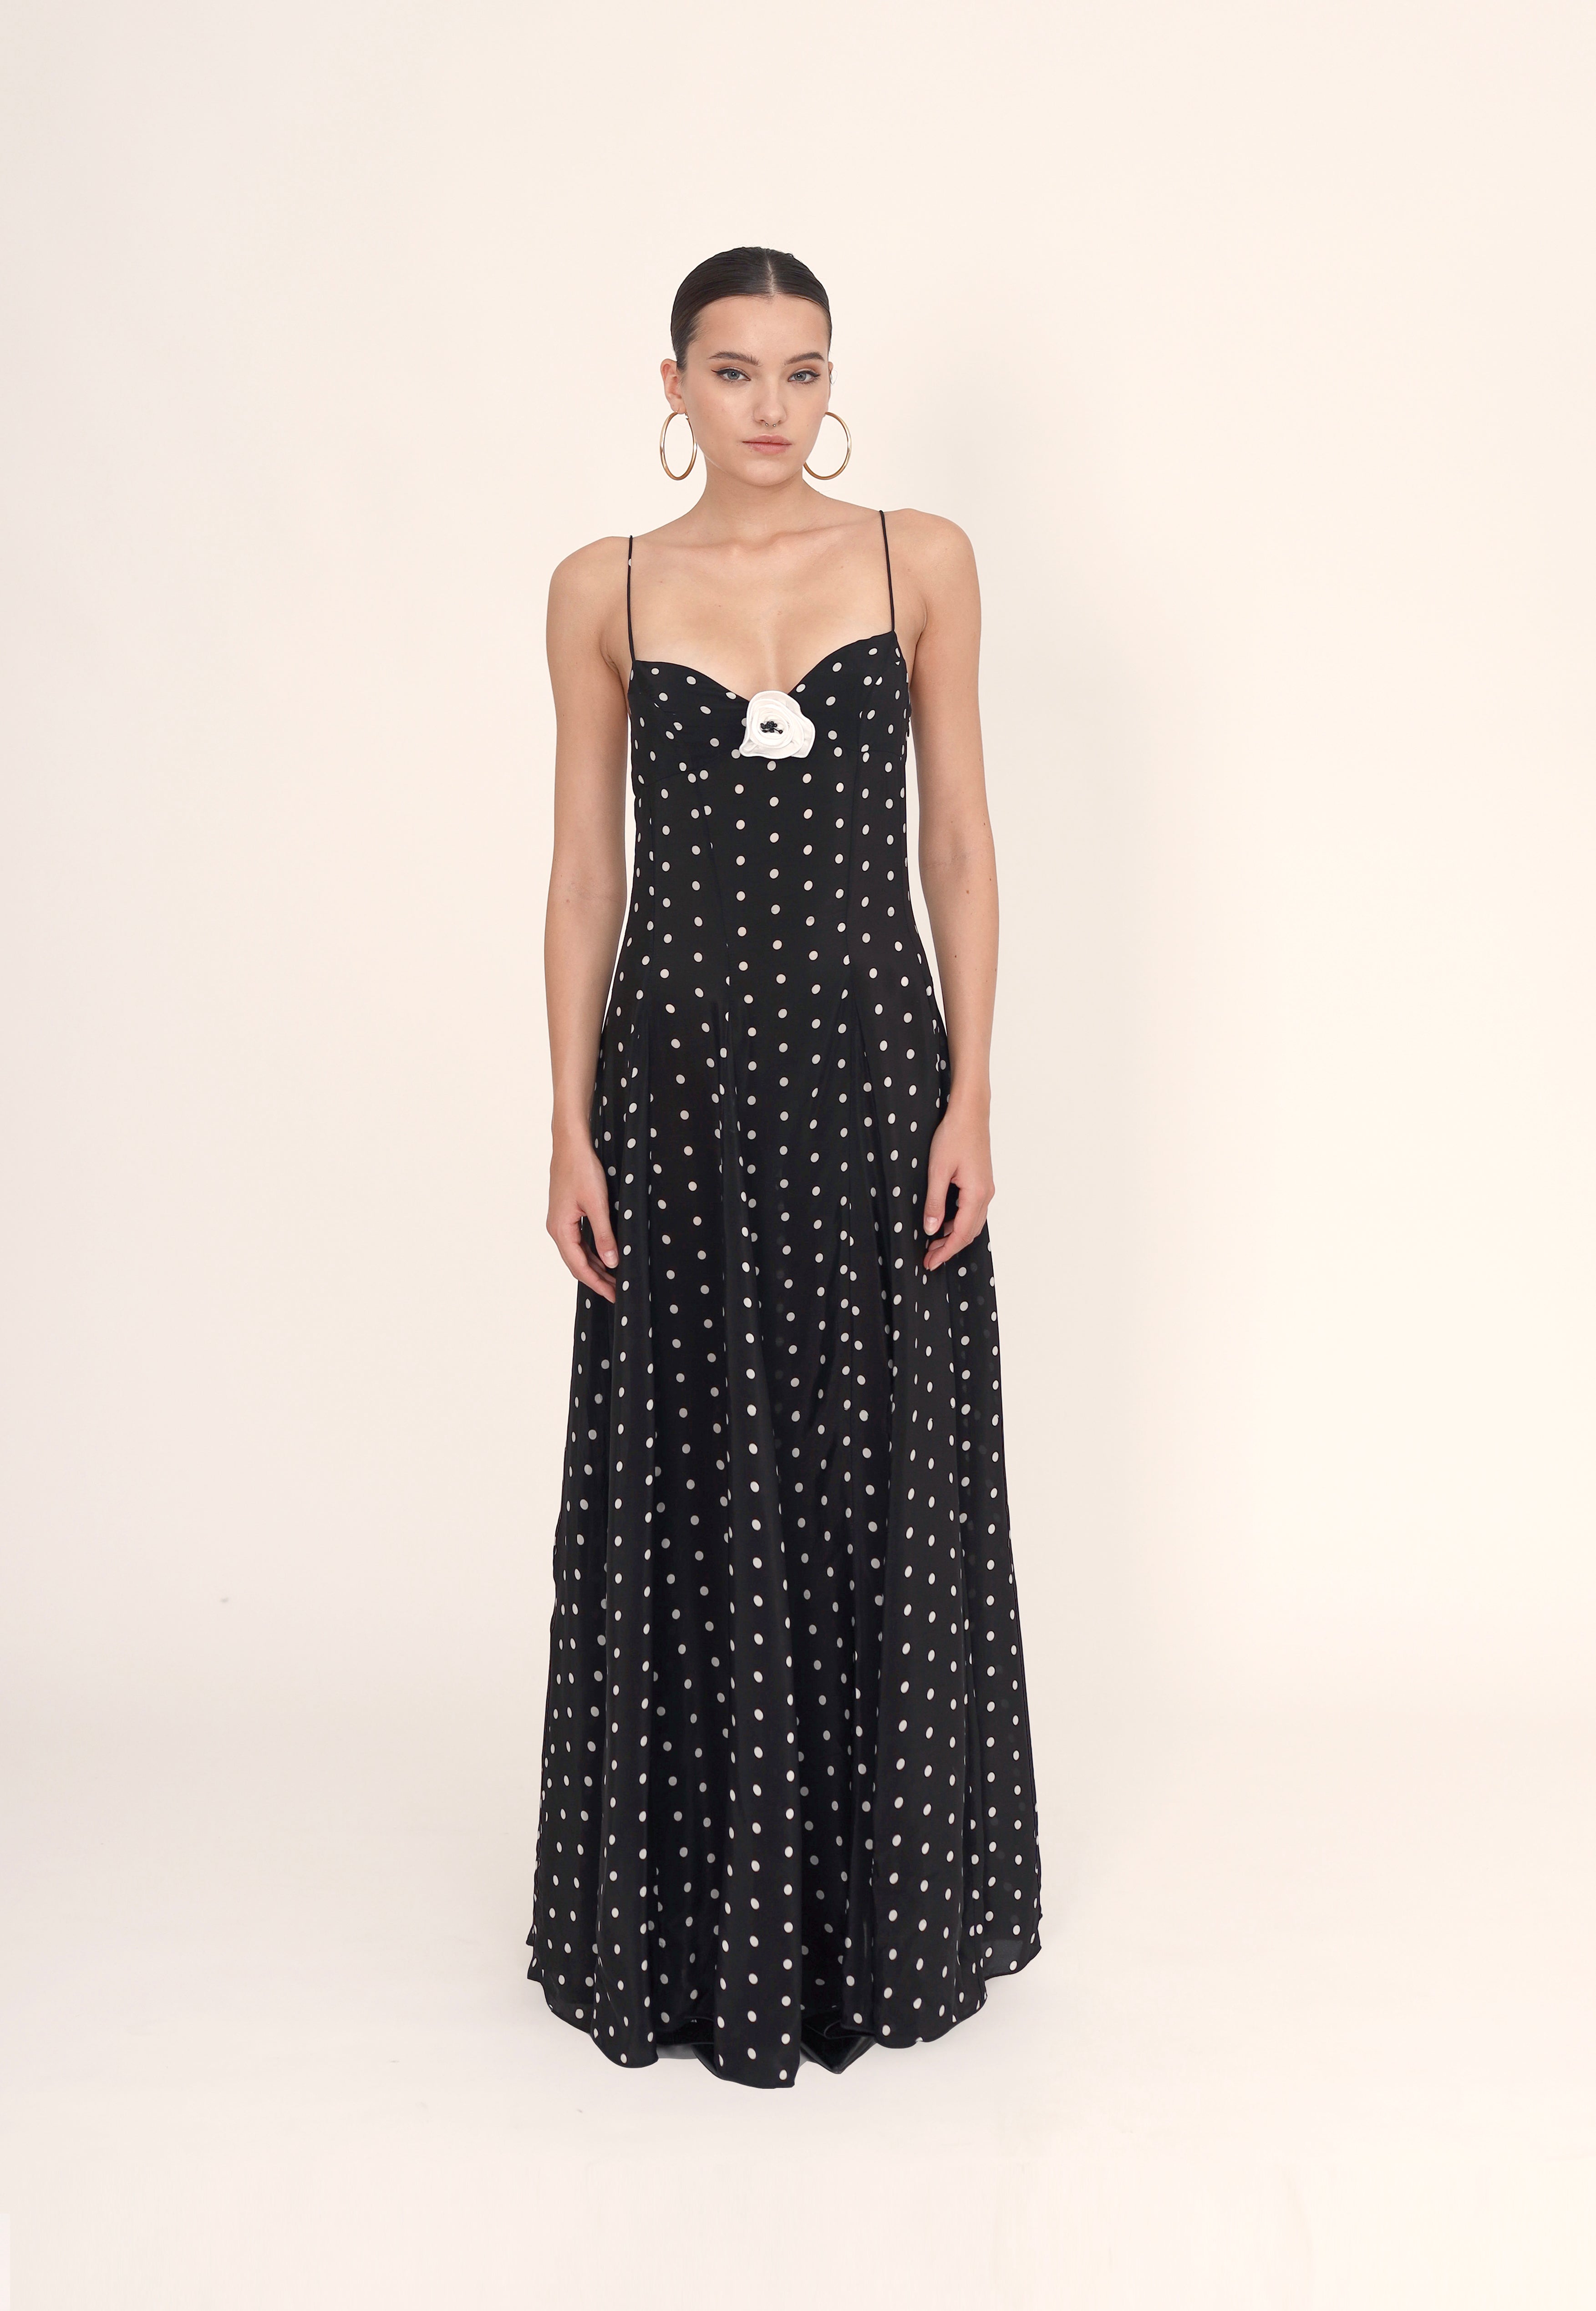 Timeless maxi dress - Black and white dots